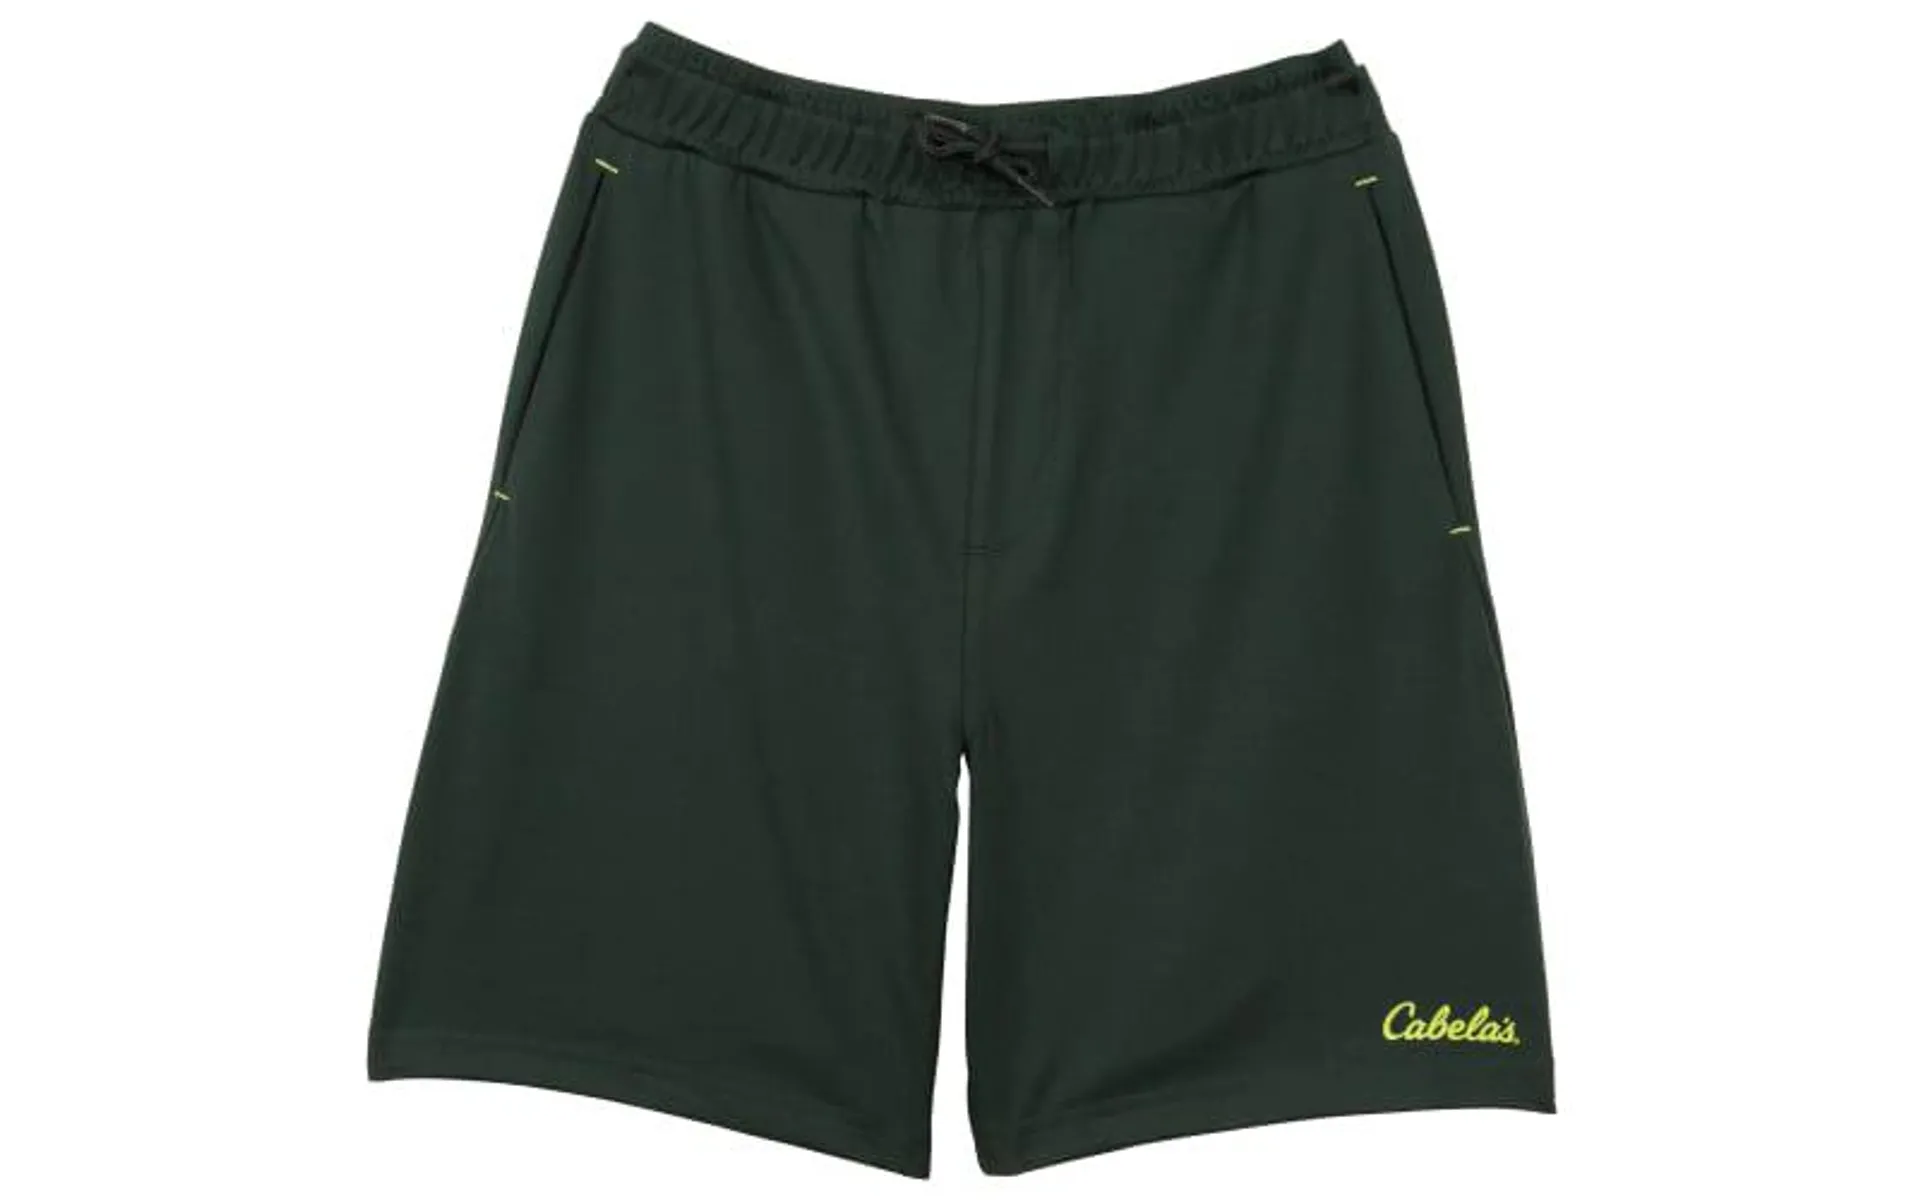 Cabela's Athletic Shorts for Toddlers or Boys